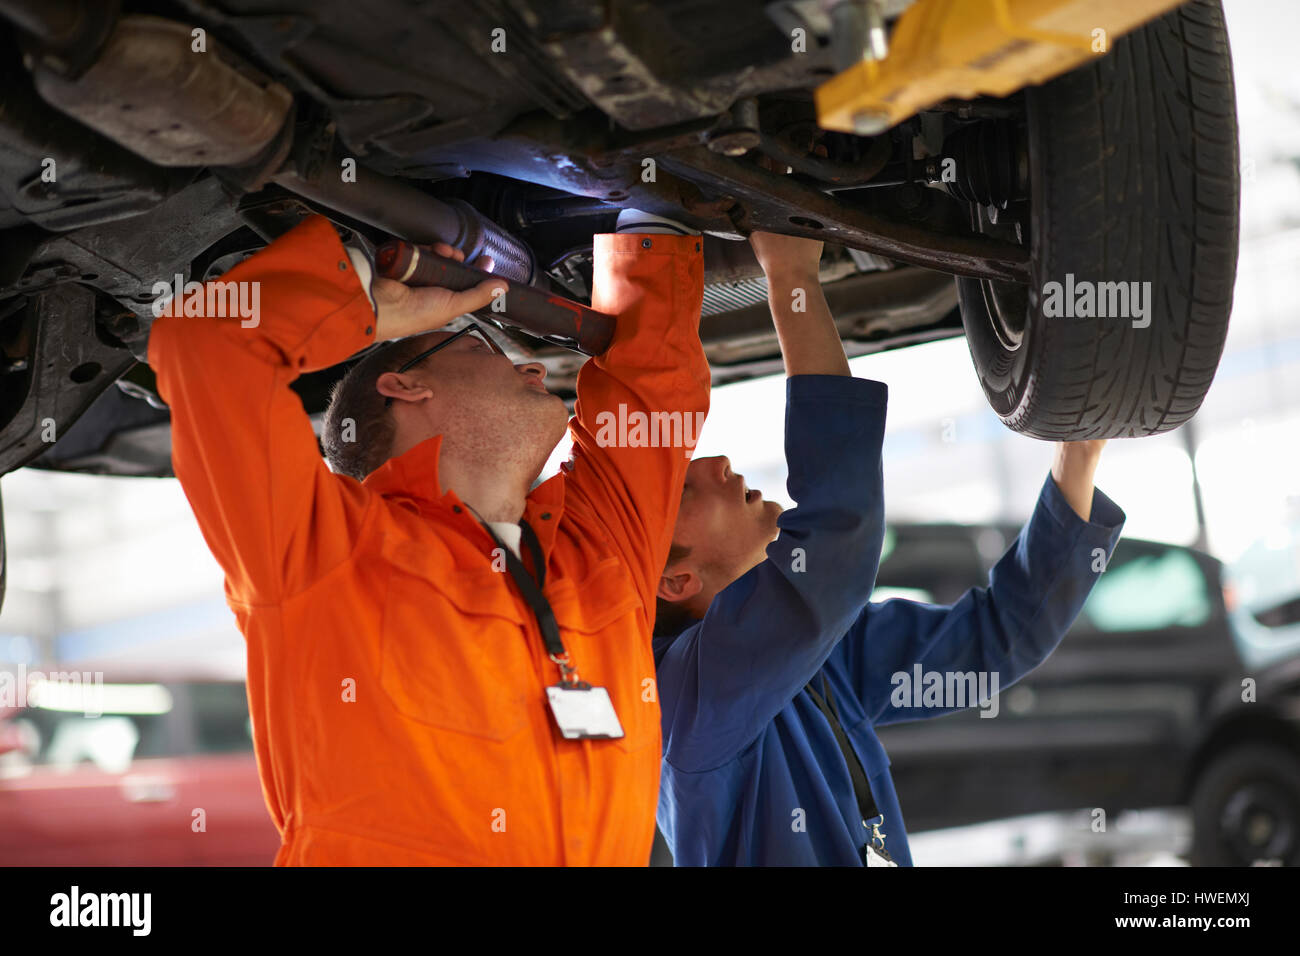 College mechanic students inspecting underneath car in repair garage Stock Photo